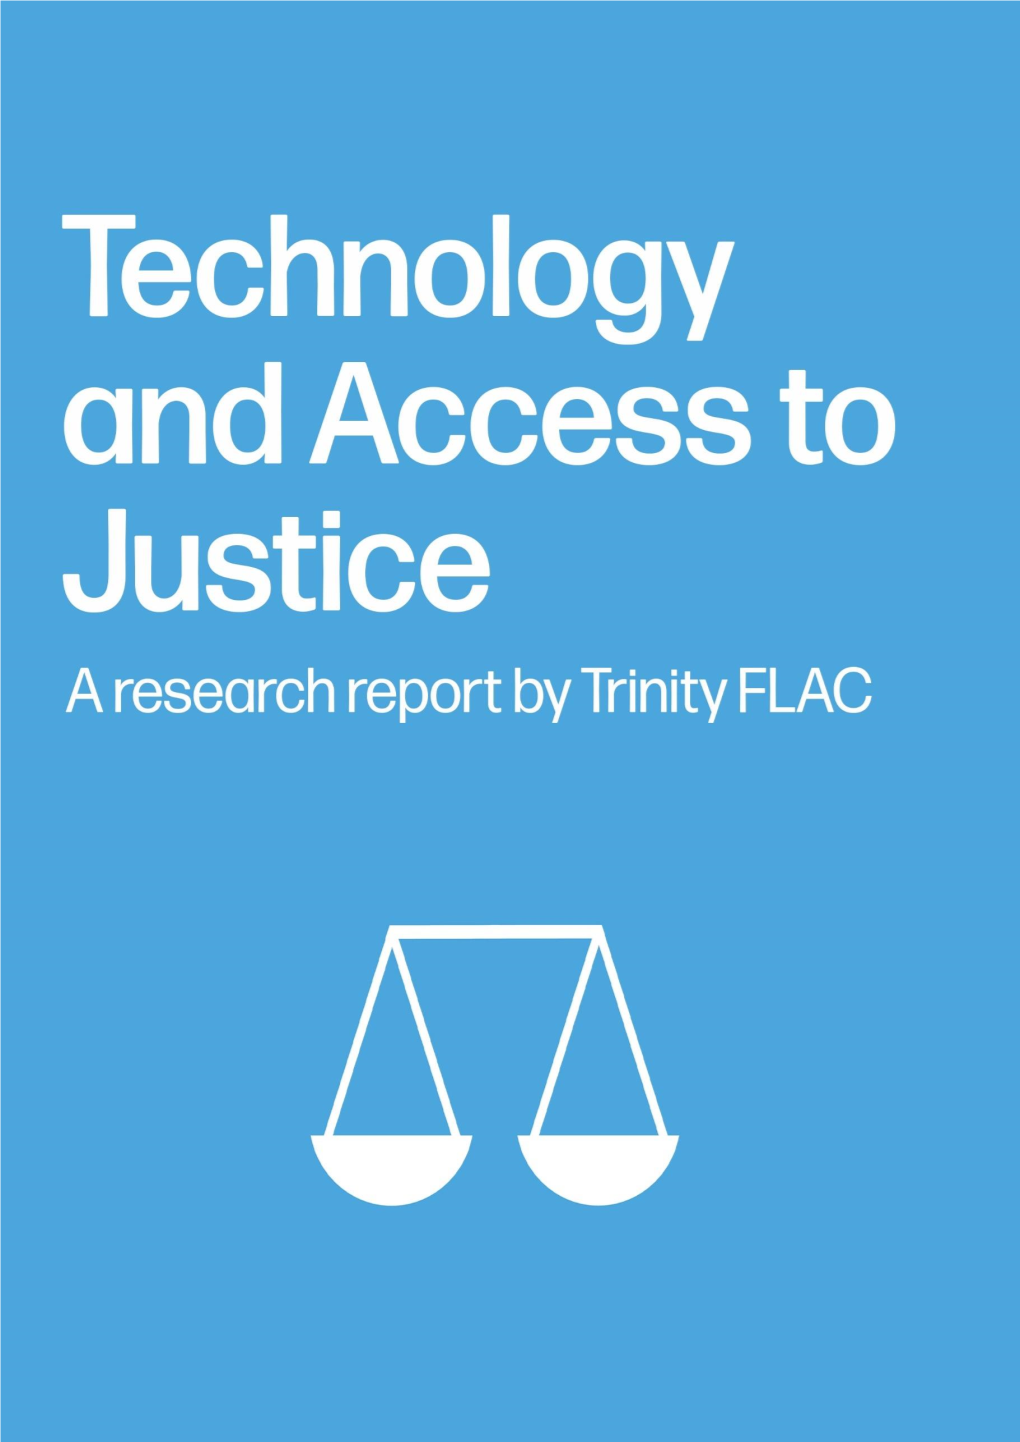 Technology and Access to Justice